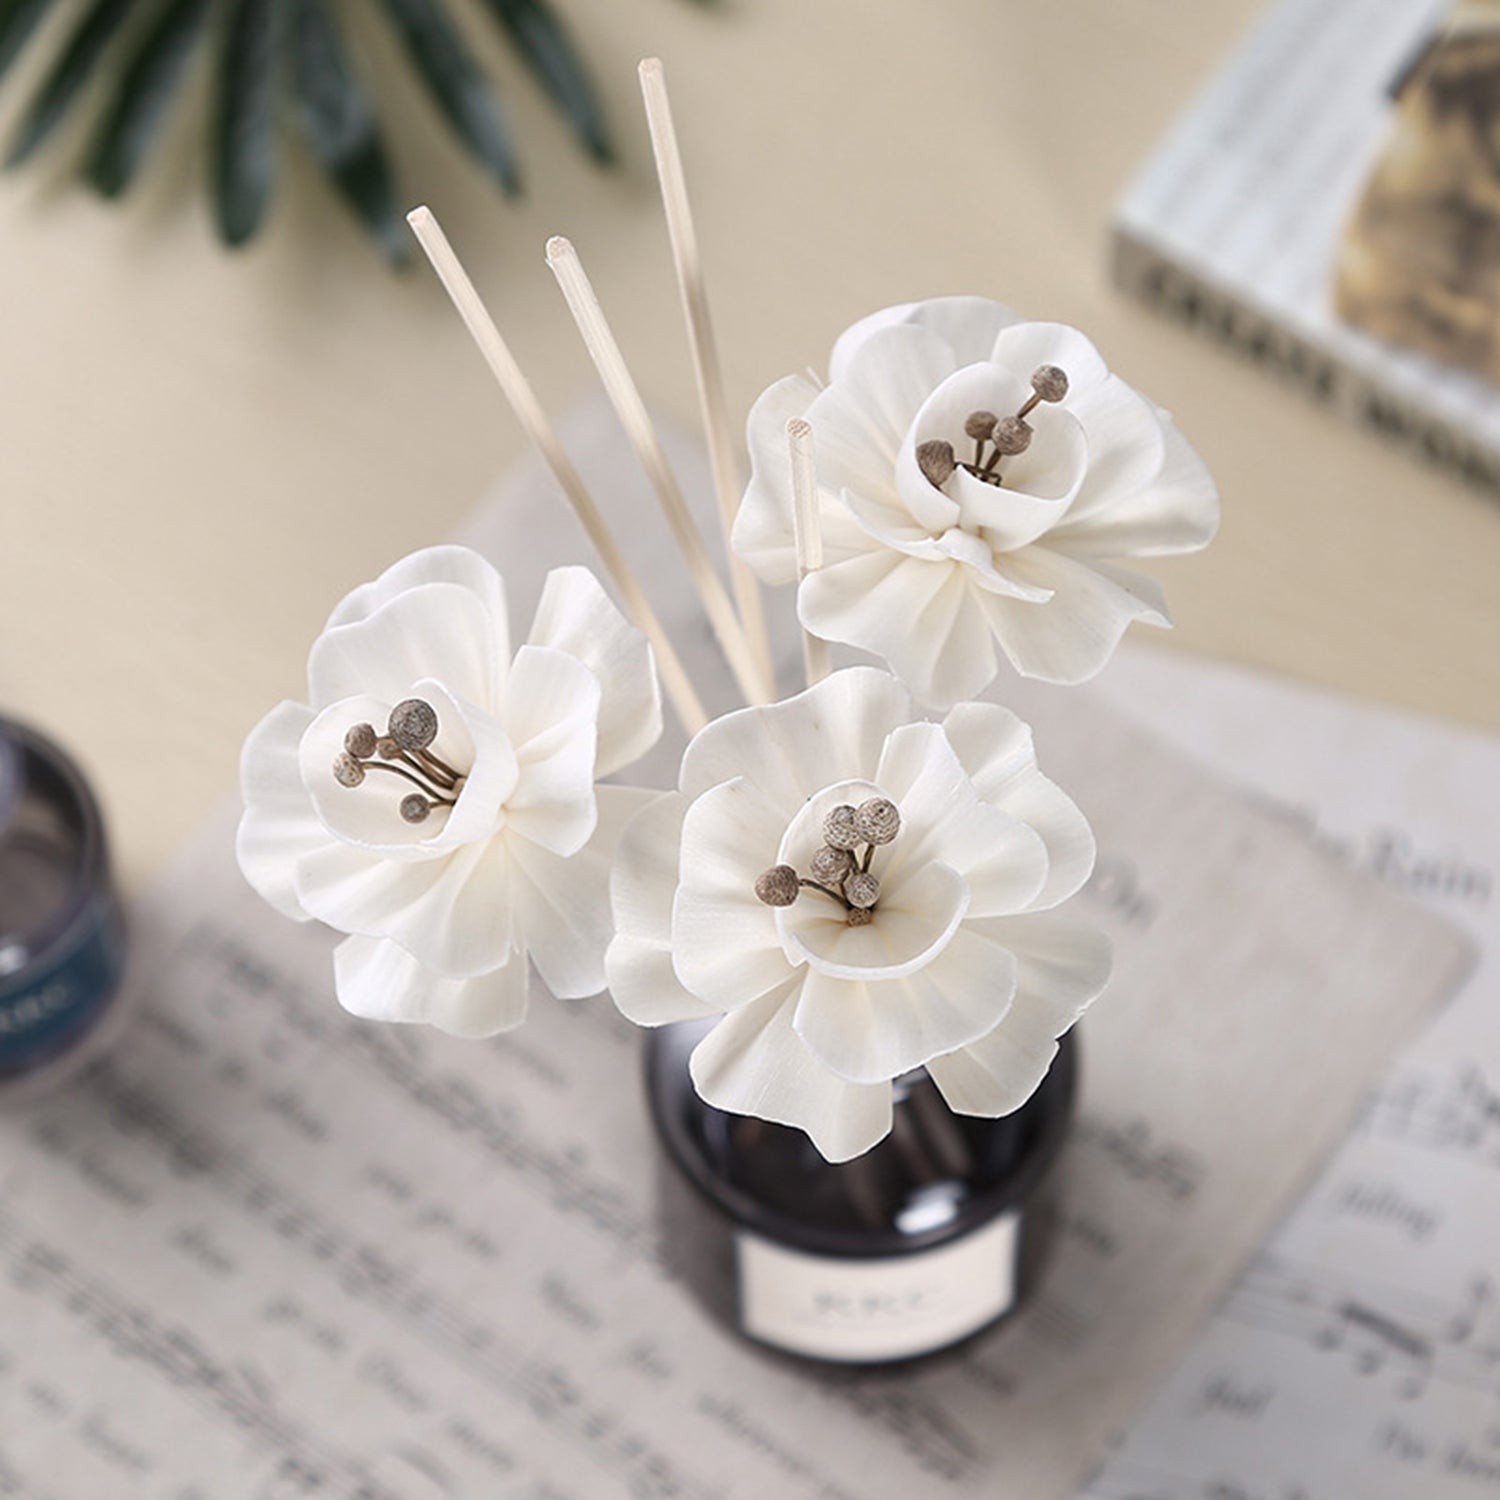 Hand-Made Sola Flower Aromatherapy Reed Diffuser Accessories Tetrapanax Papyrifer Dried Simulated Flowers Reed Diffuser Accessories OEM 